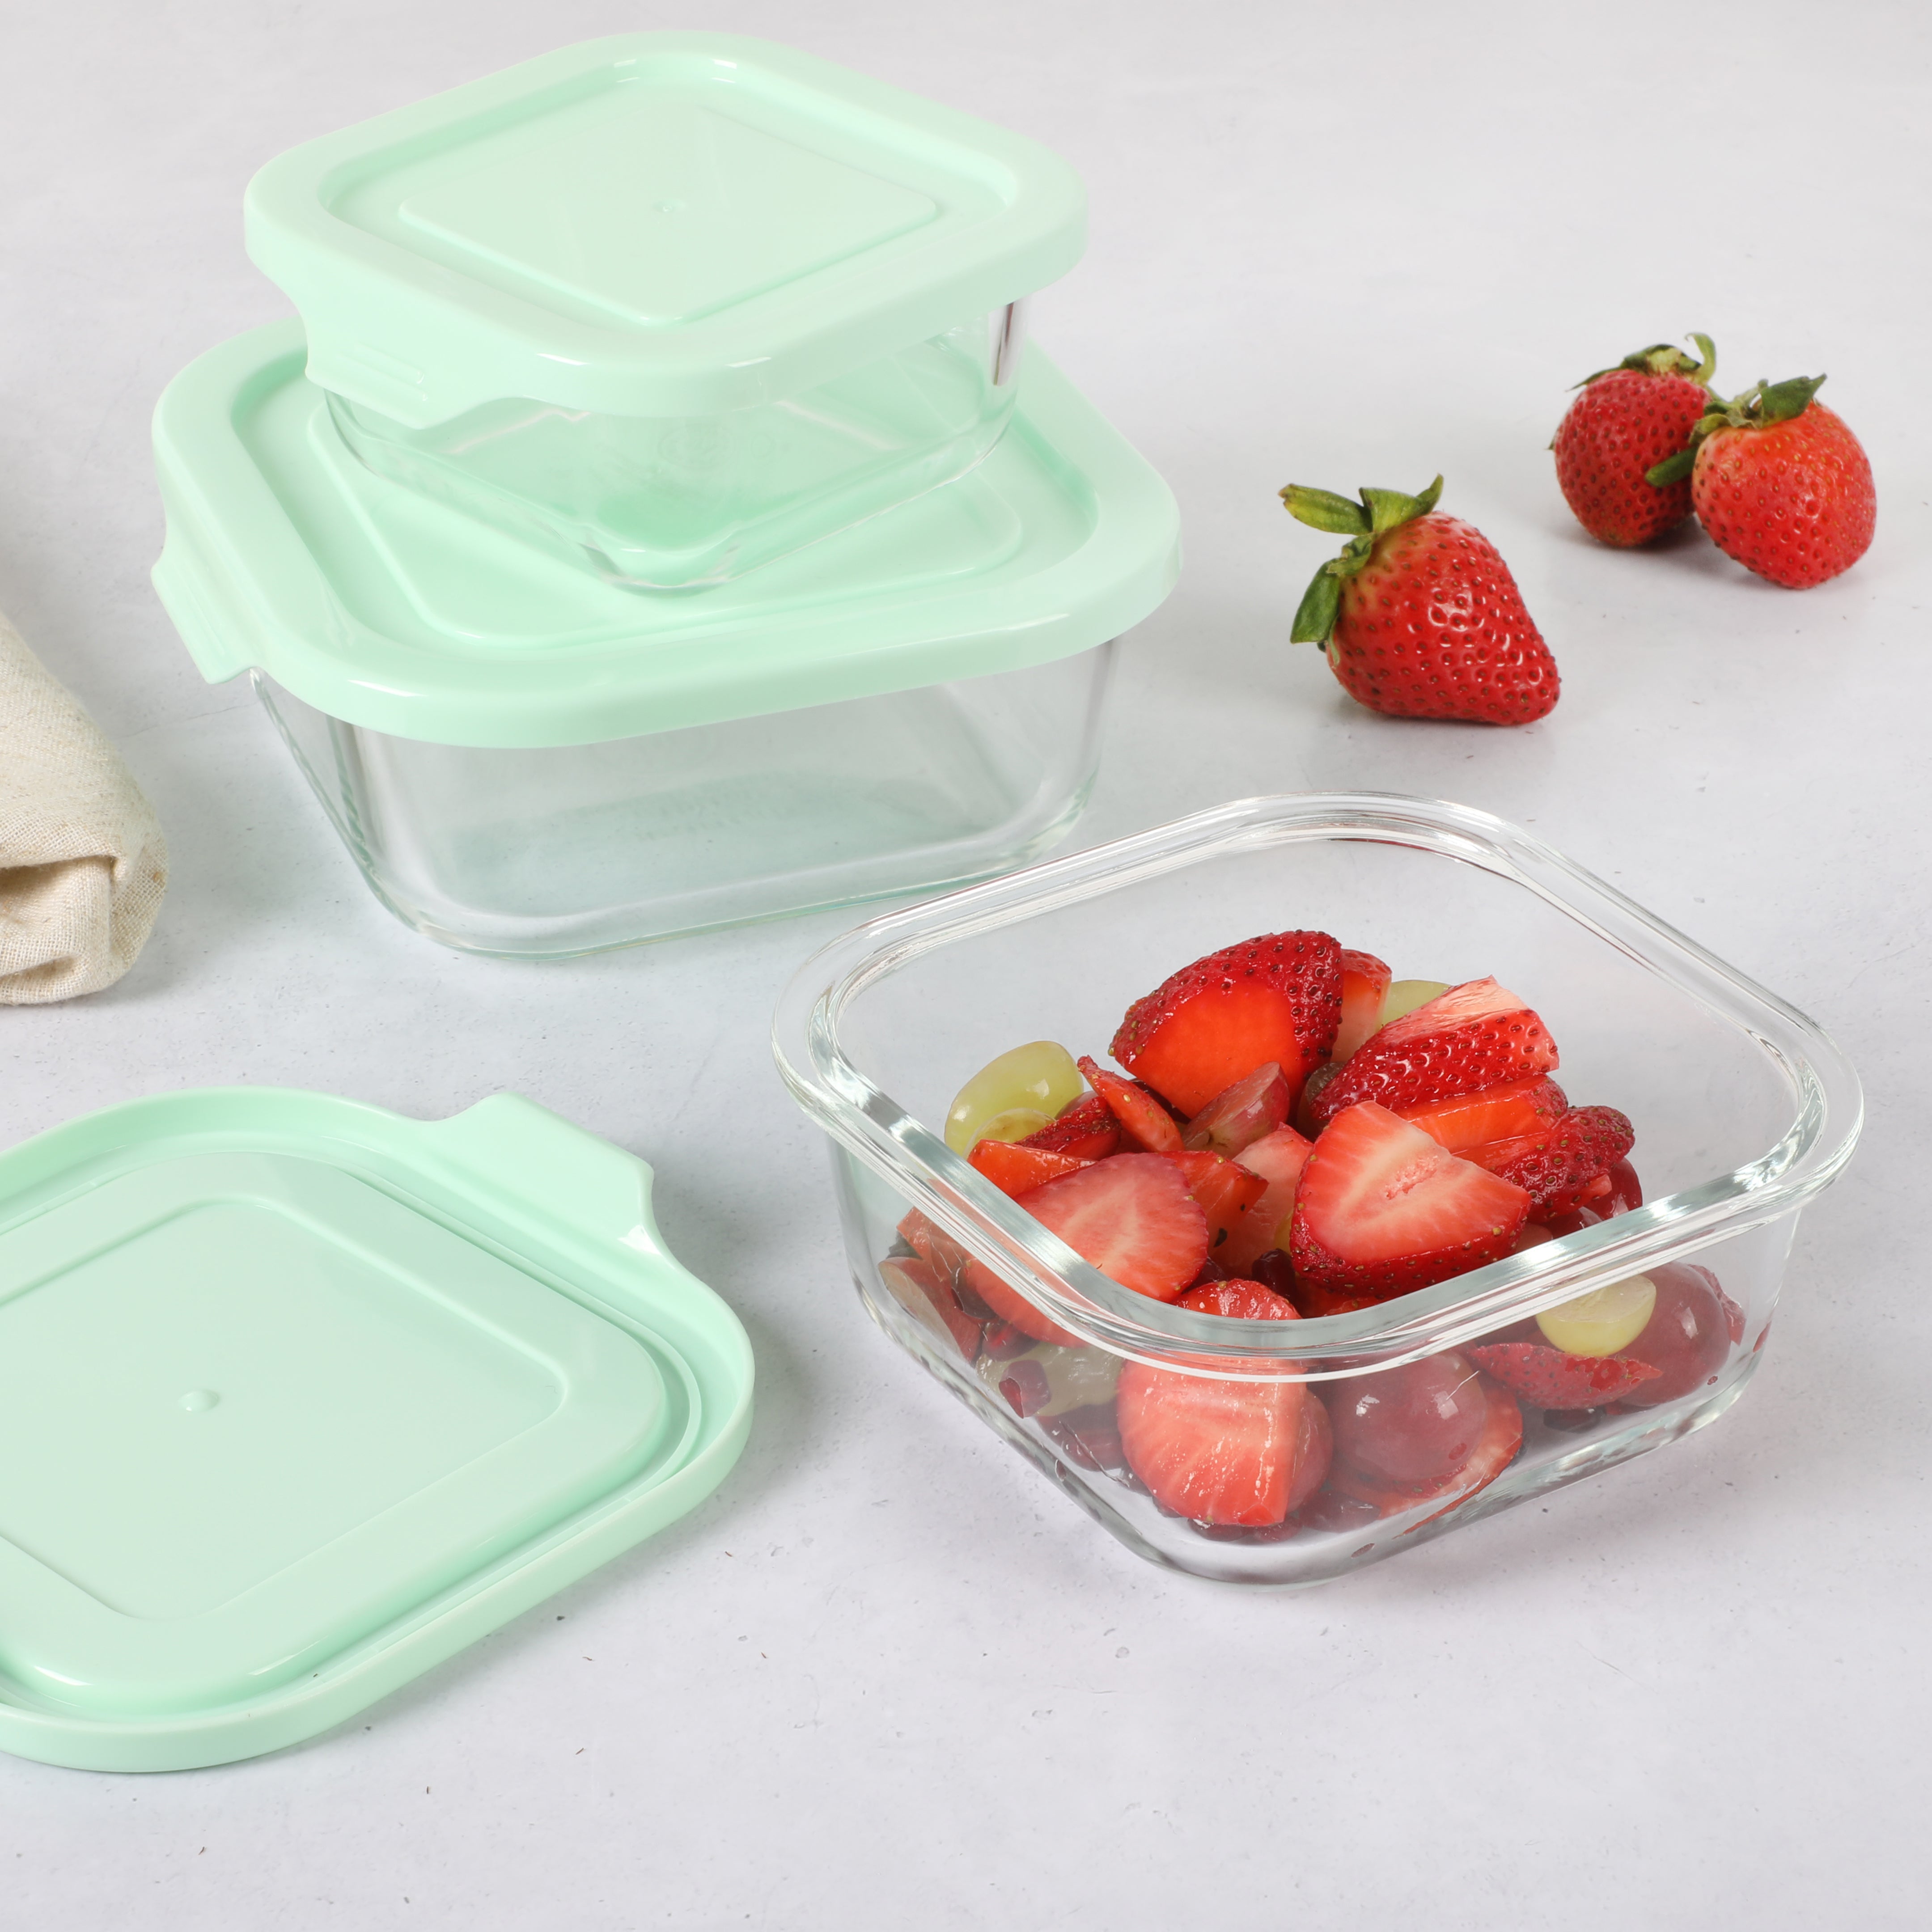 Food Storage Containers - 6-piece Containers With Lids Set For